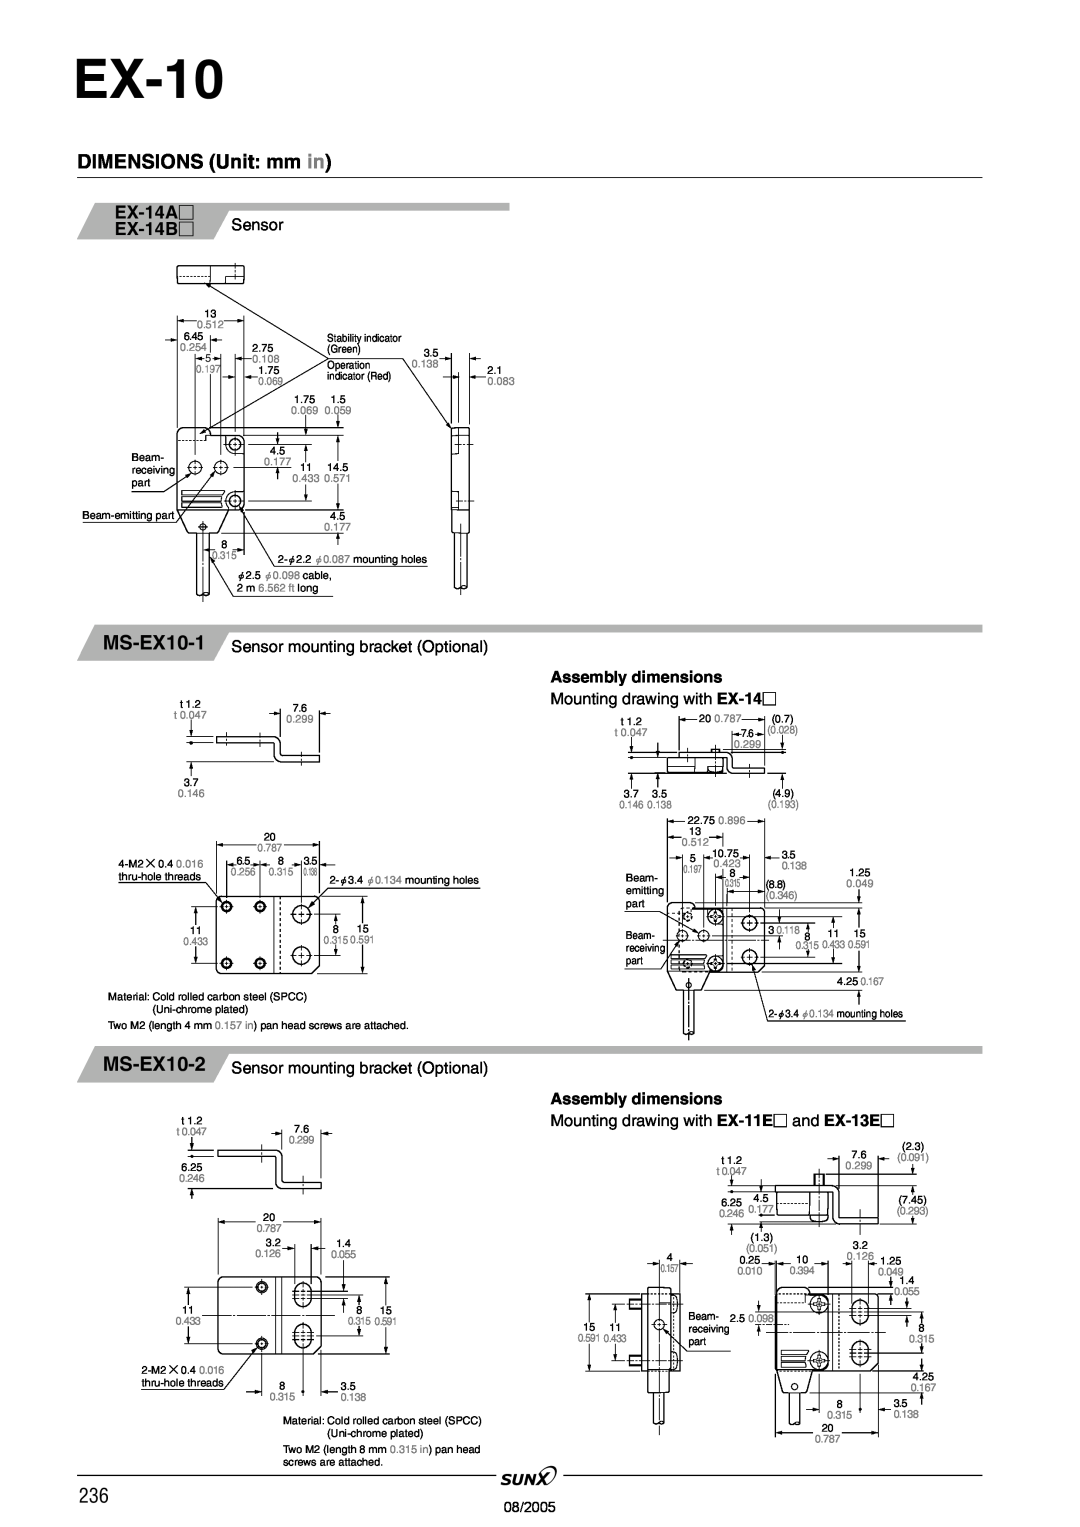 Panasonic EX-10 Series manual MS-EX10-1, EX-14A EX-14B Sensor, Assembly dimensions, Mounting drawing with EX-14, 08/2005 